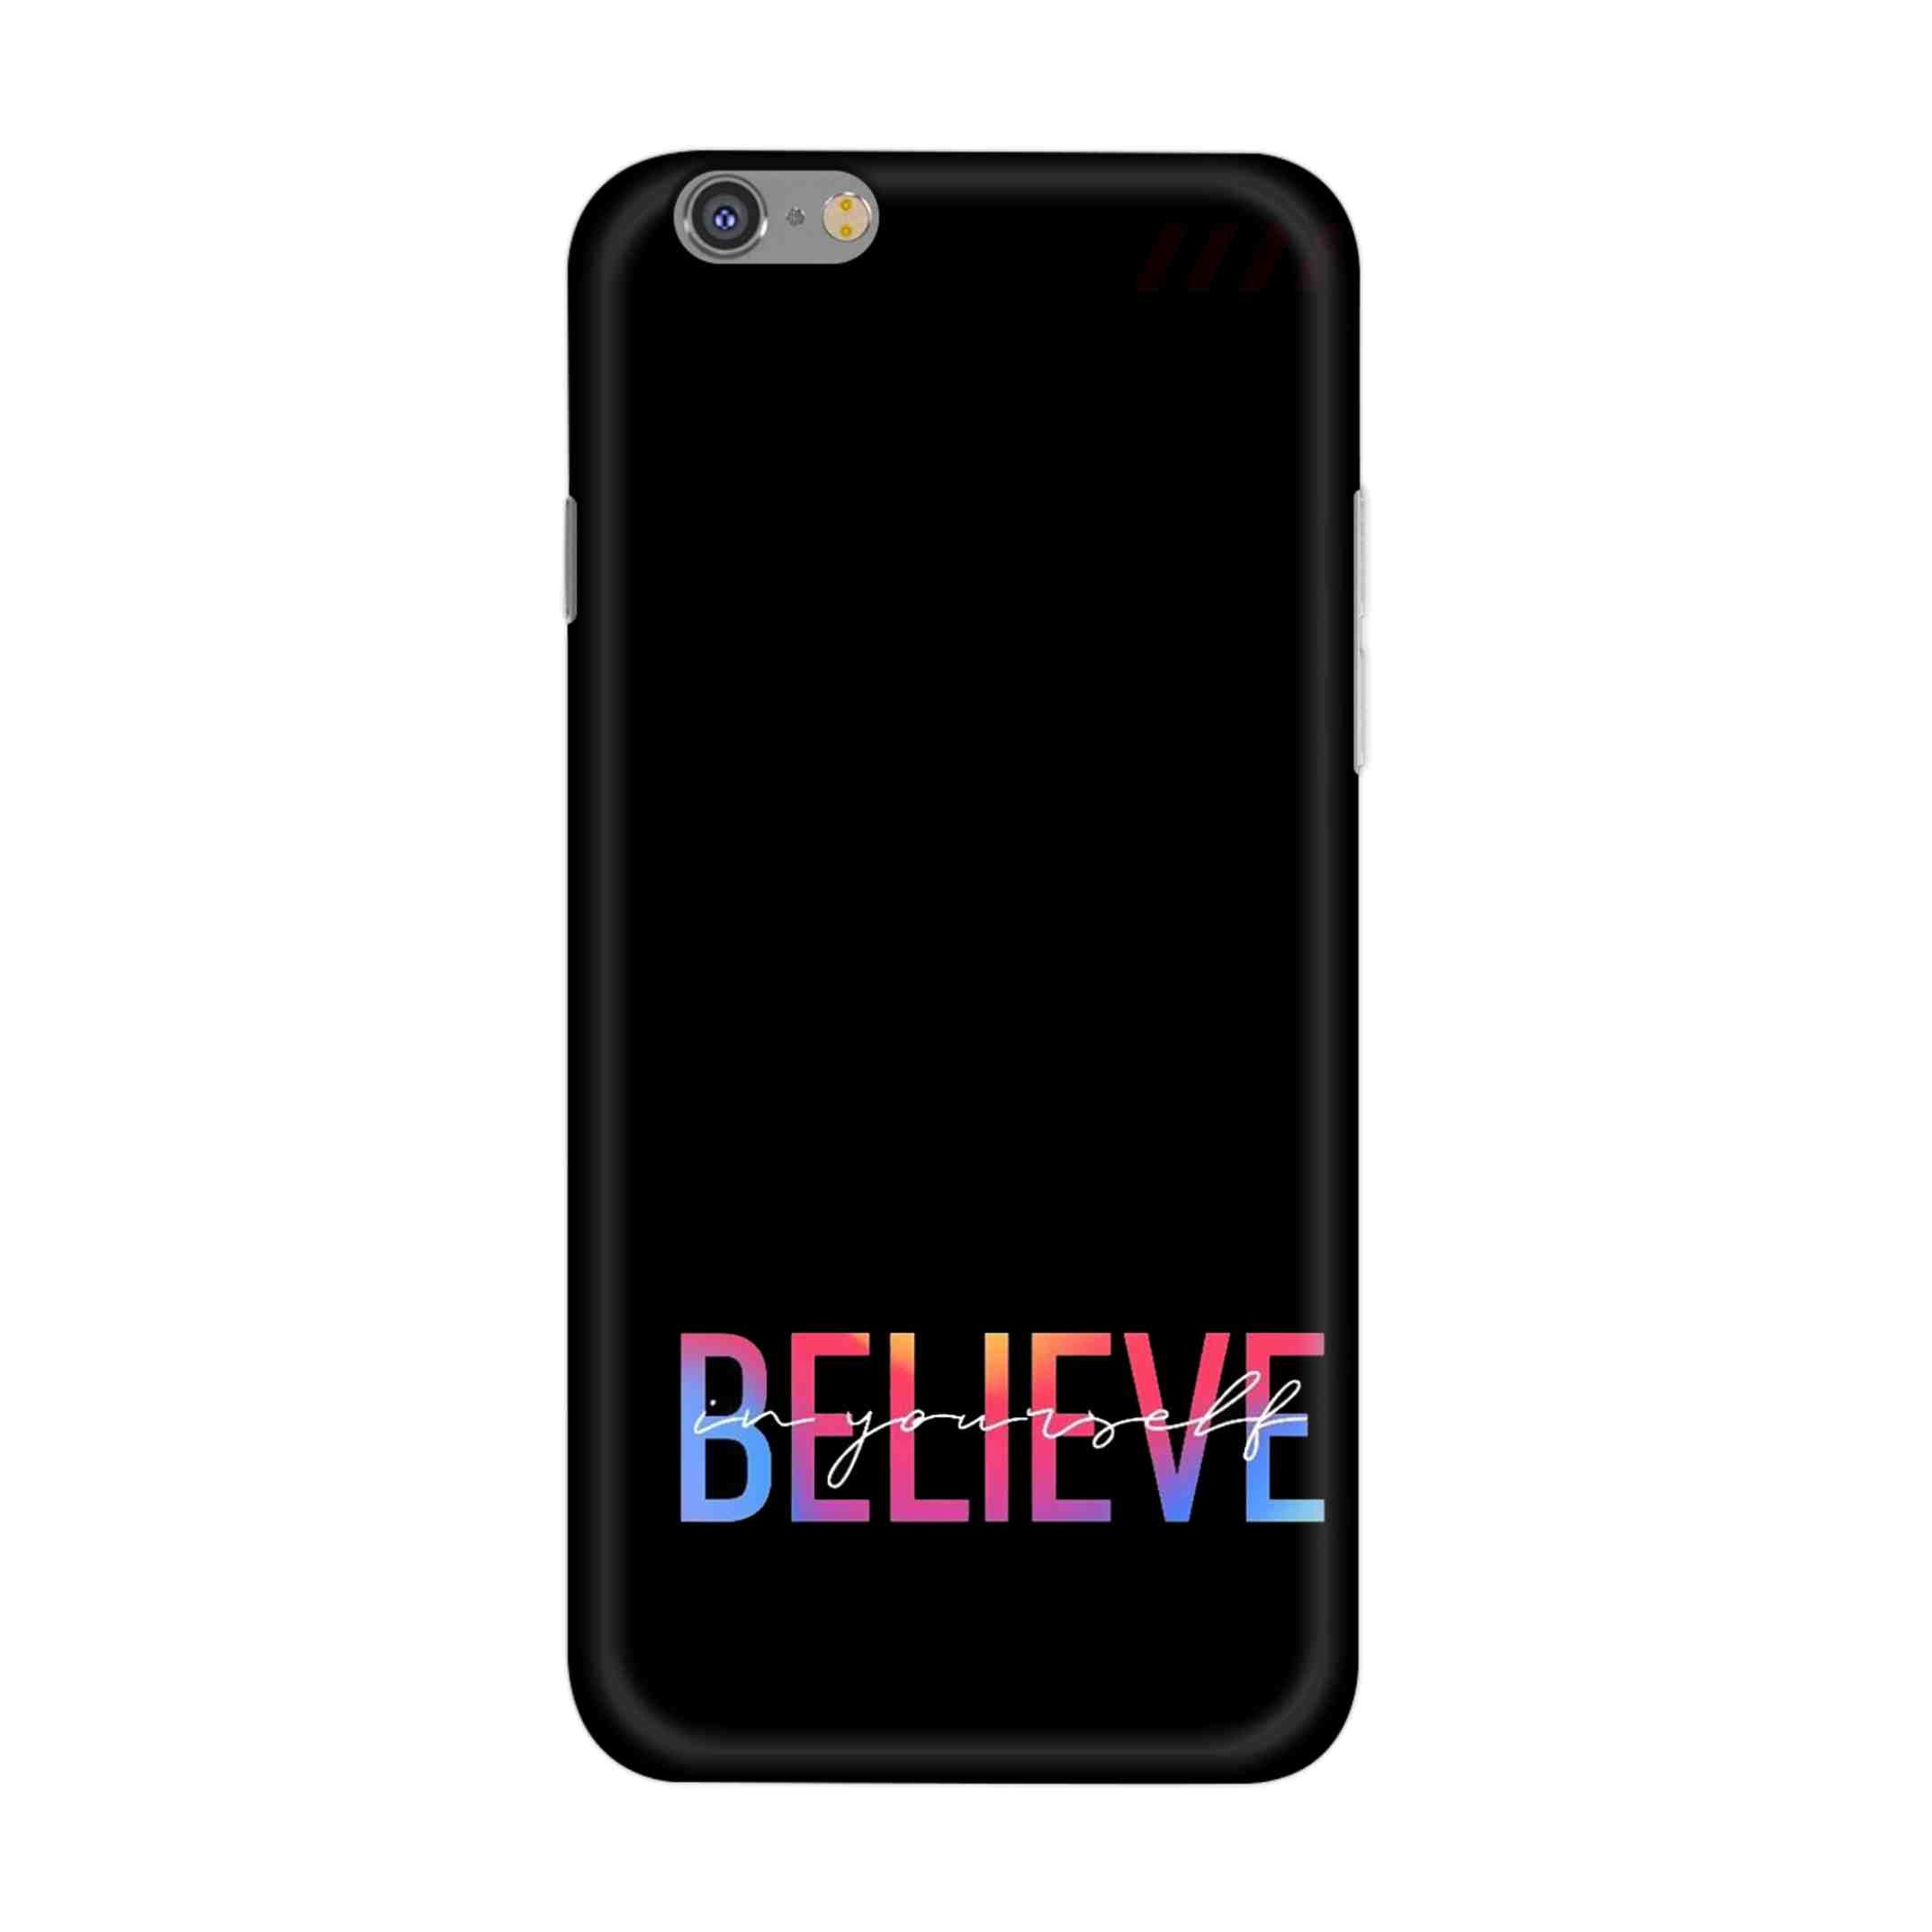 Buy Believe Hard Back Mobile Phone Case/Cover For iPhone 6 / 6s Online